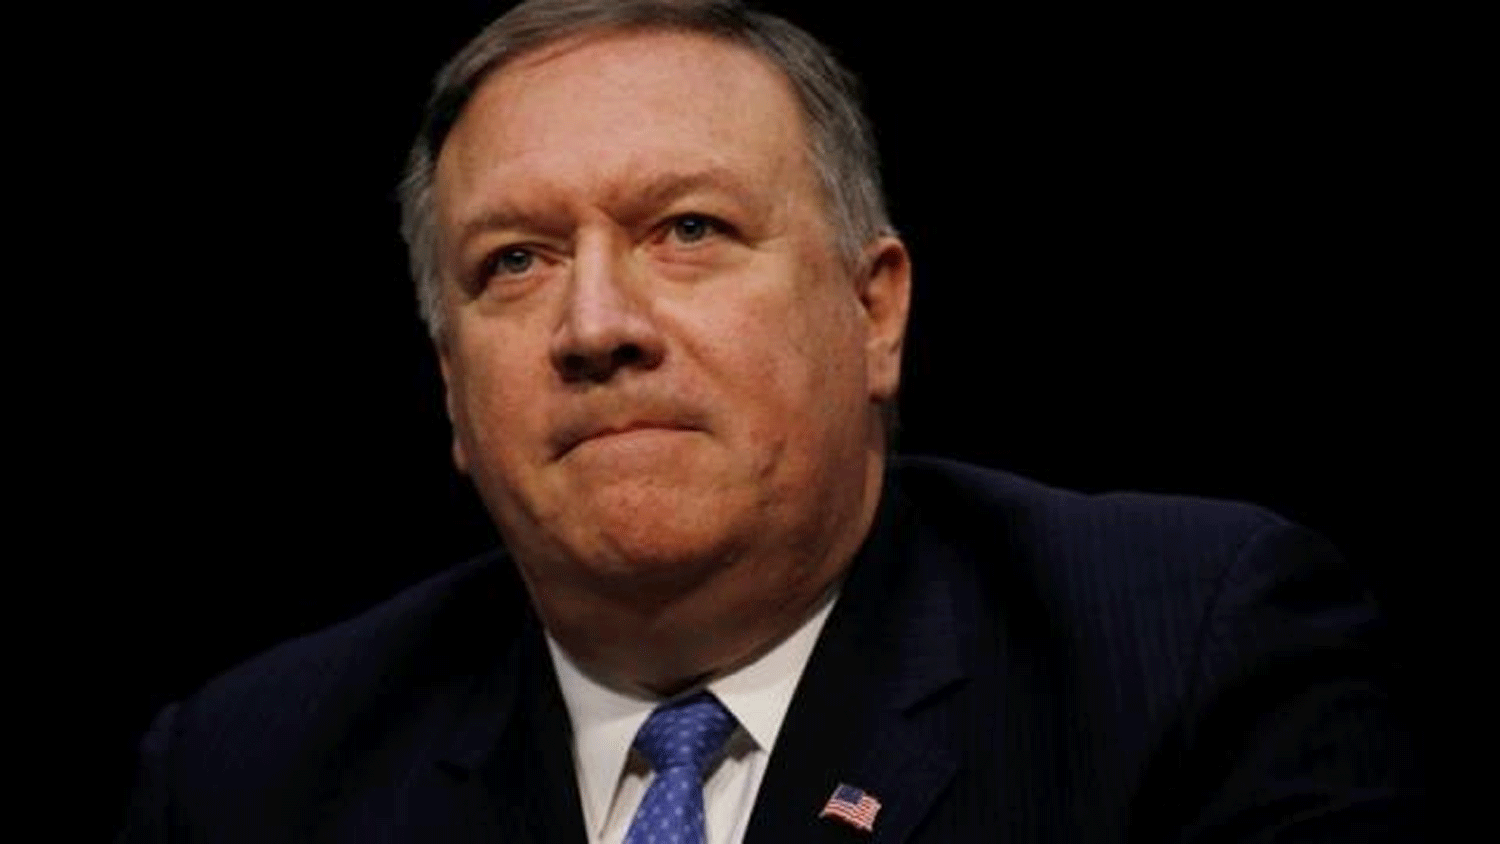 Pompeo says U.S. committed to de-escalation after killing Soleimani